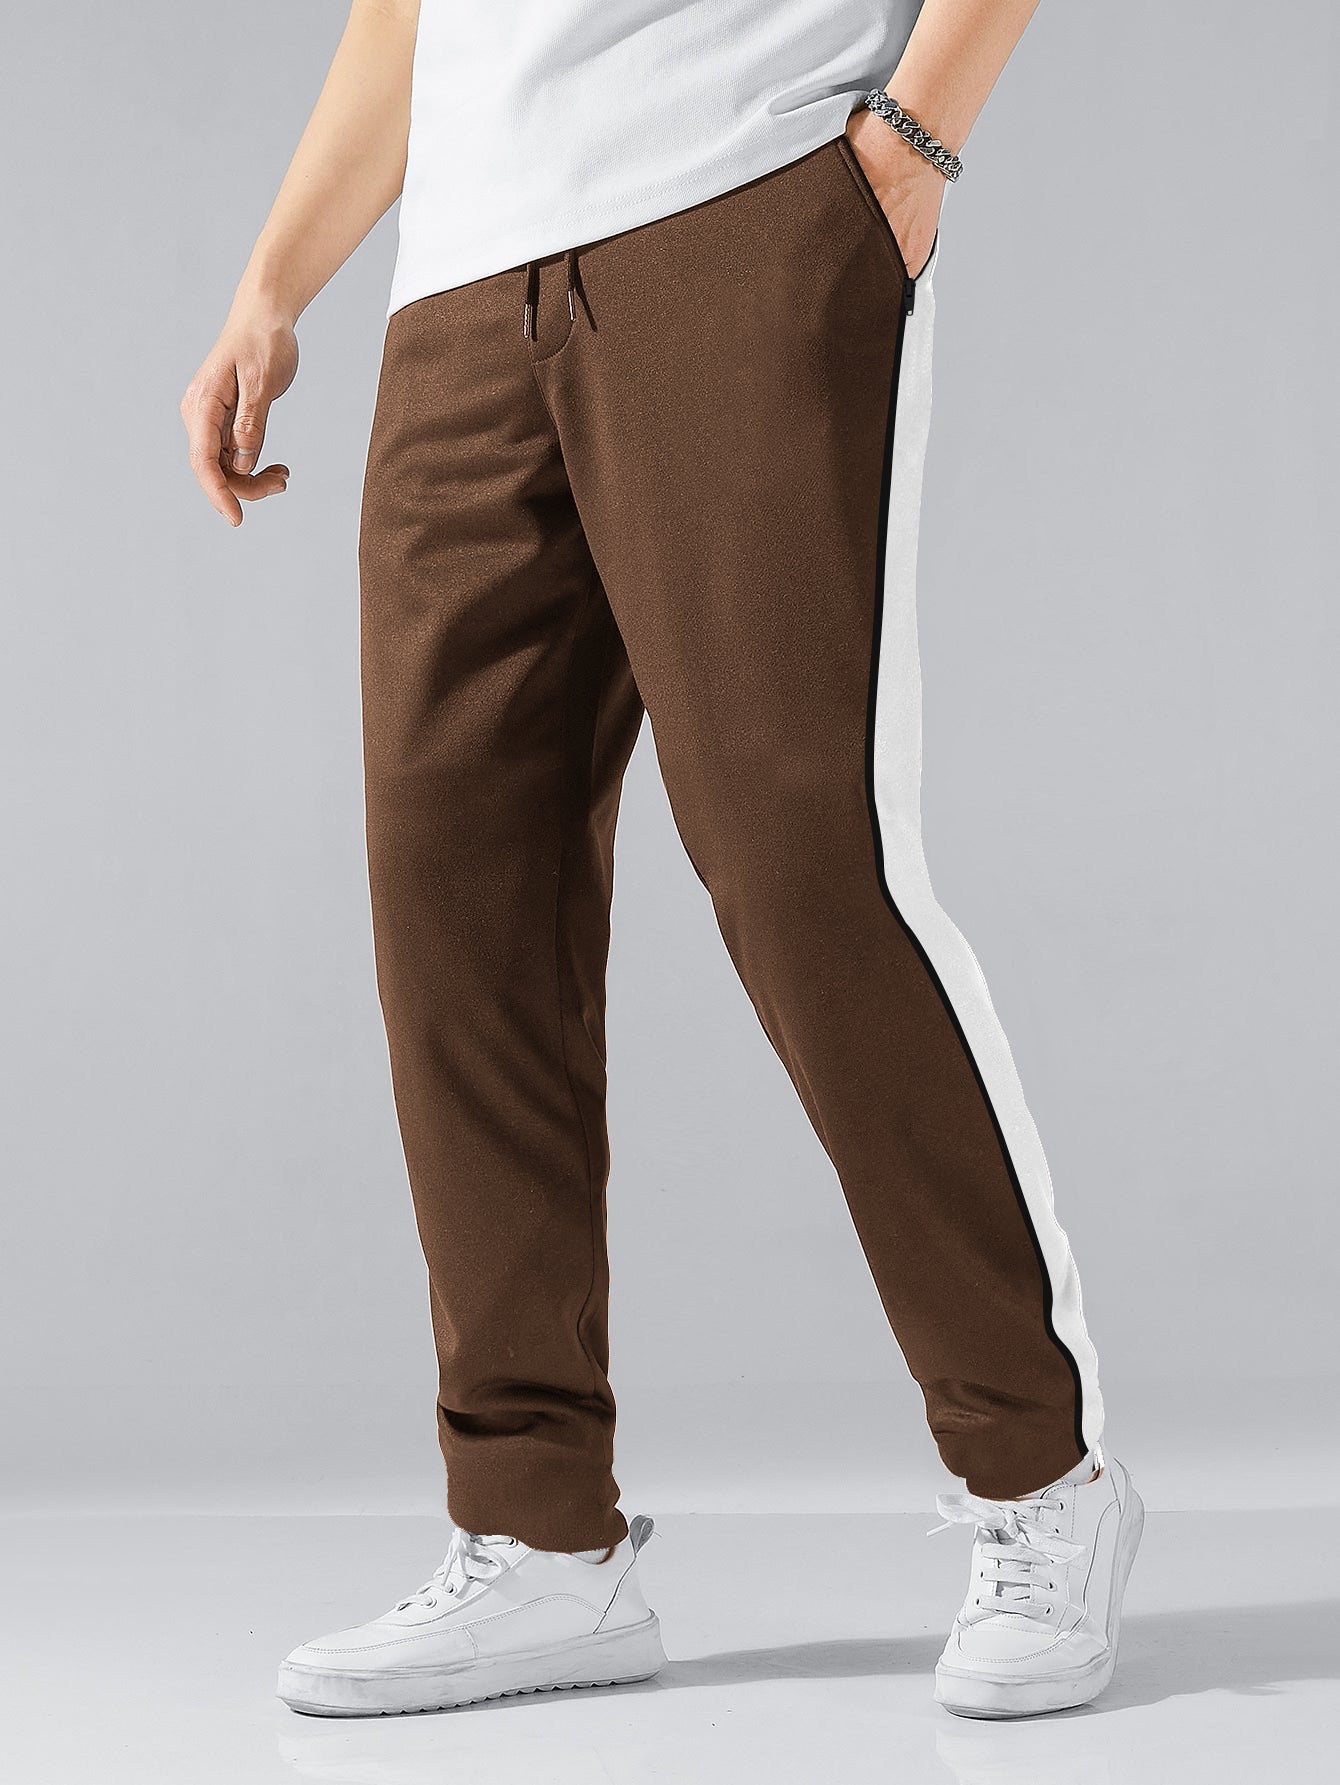 Louis Vicaci Summer Trouser Pant For Men-Light Brown with Stripe-BR649 -  BrandsEgo